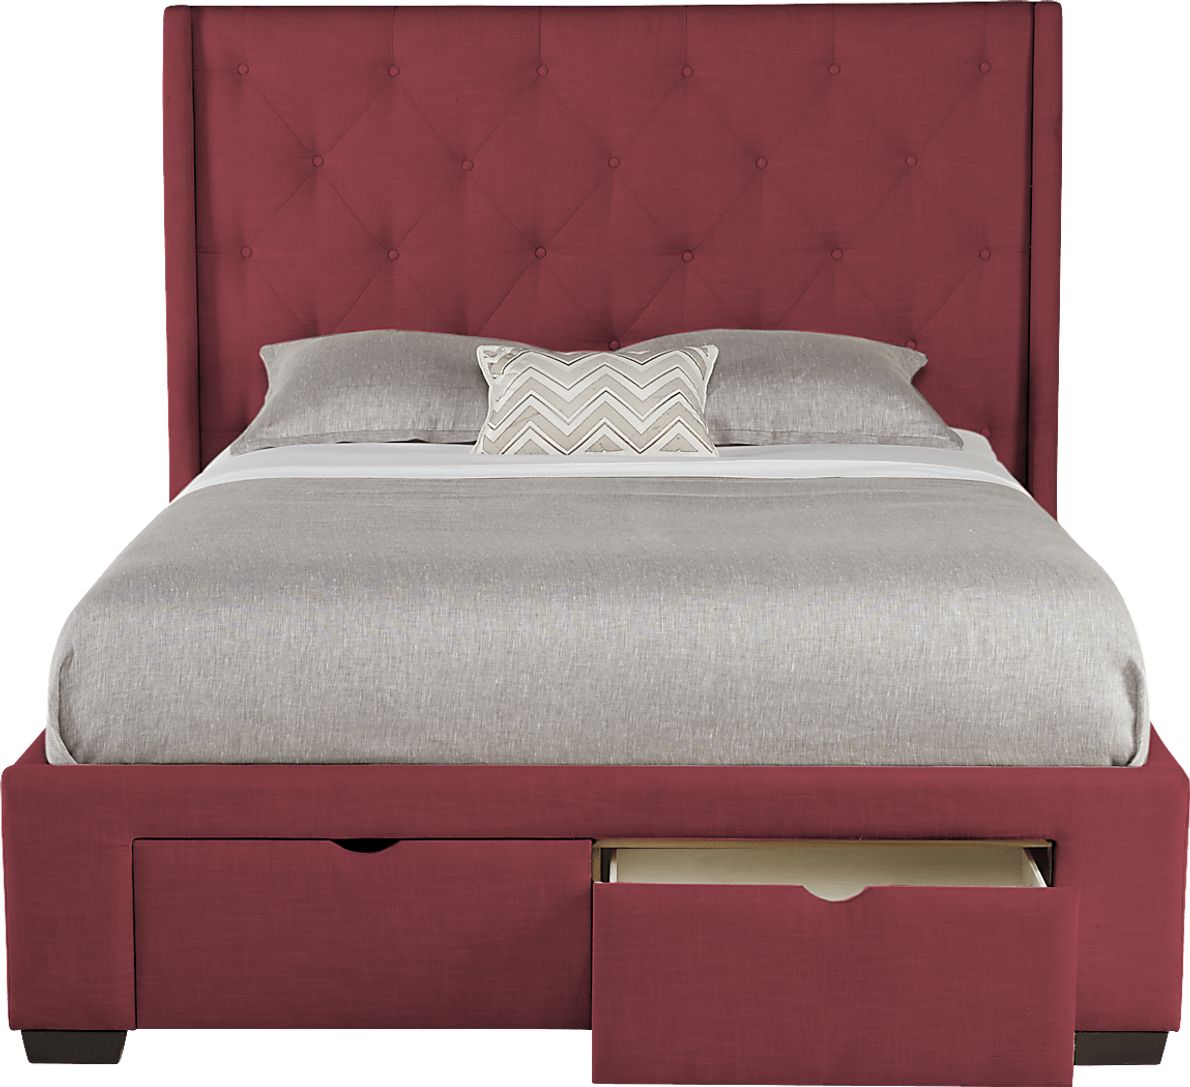 Alison Red 3 Pc Queen Upholstered Bed with 2 Drawer Storage